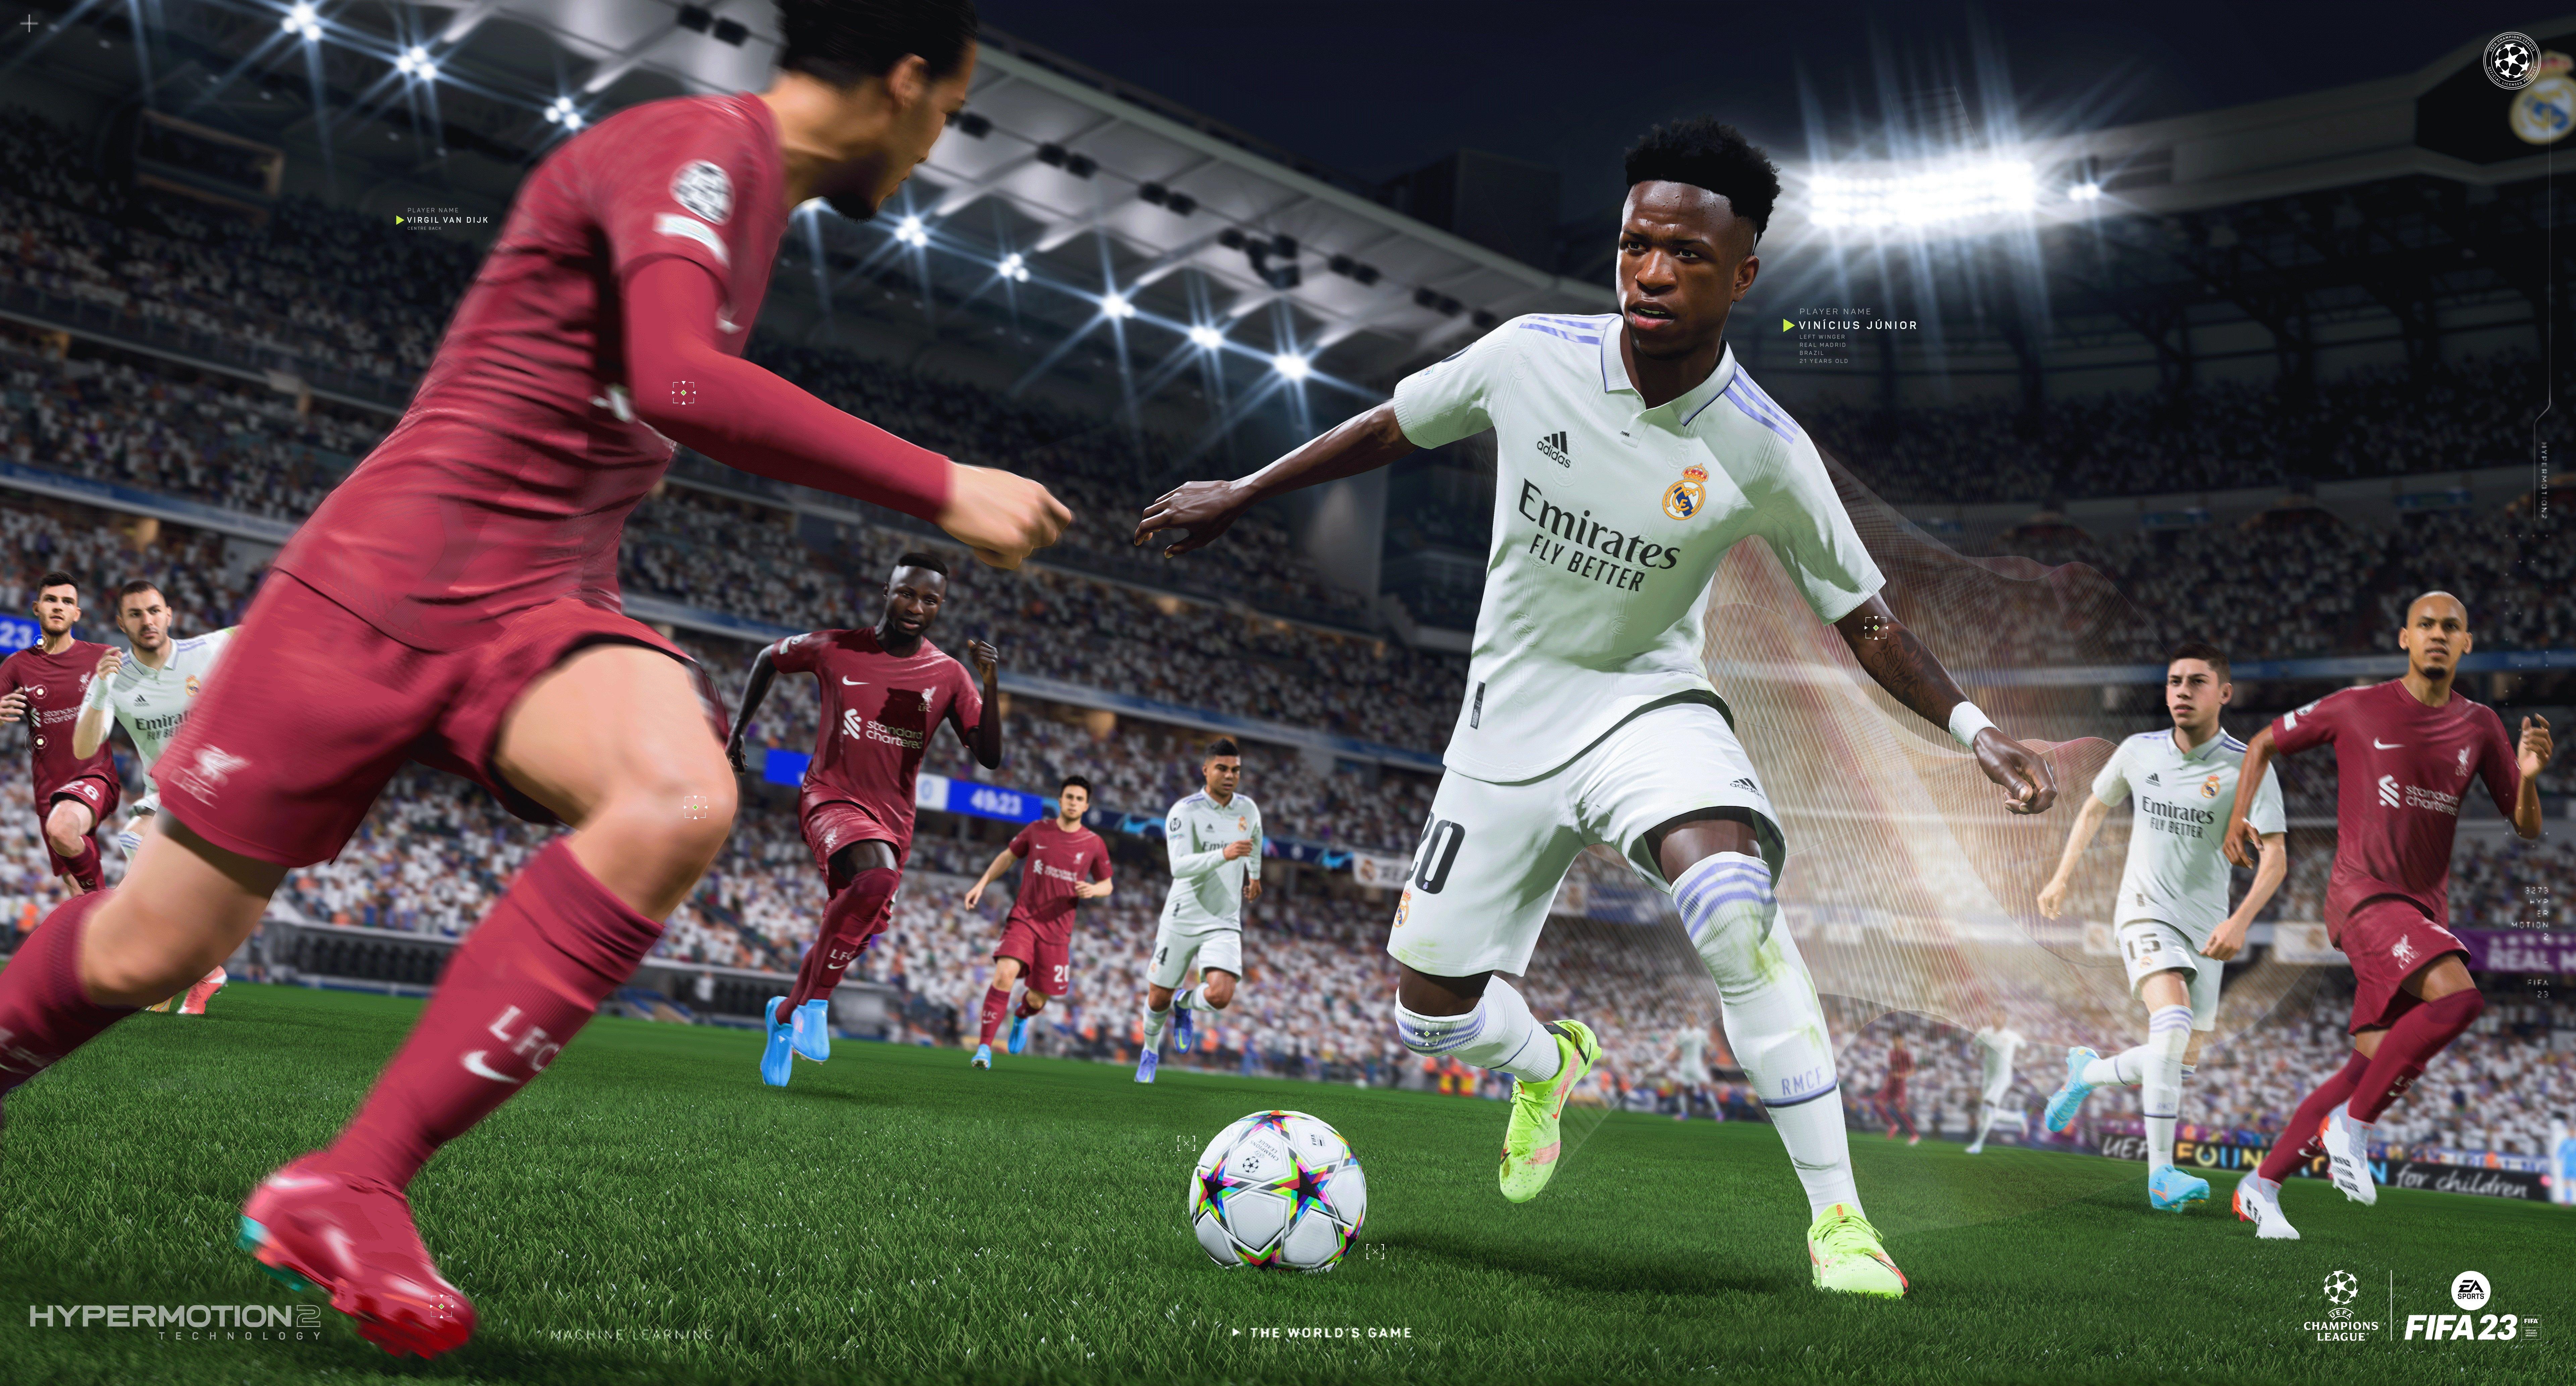 Game Plus App (Game+) on X: 🚨 FIFA 23 IS HERE 🚨 Get in on the #WorldCup  action - this title is now supported on the Game+ App. Run your first  challenge